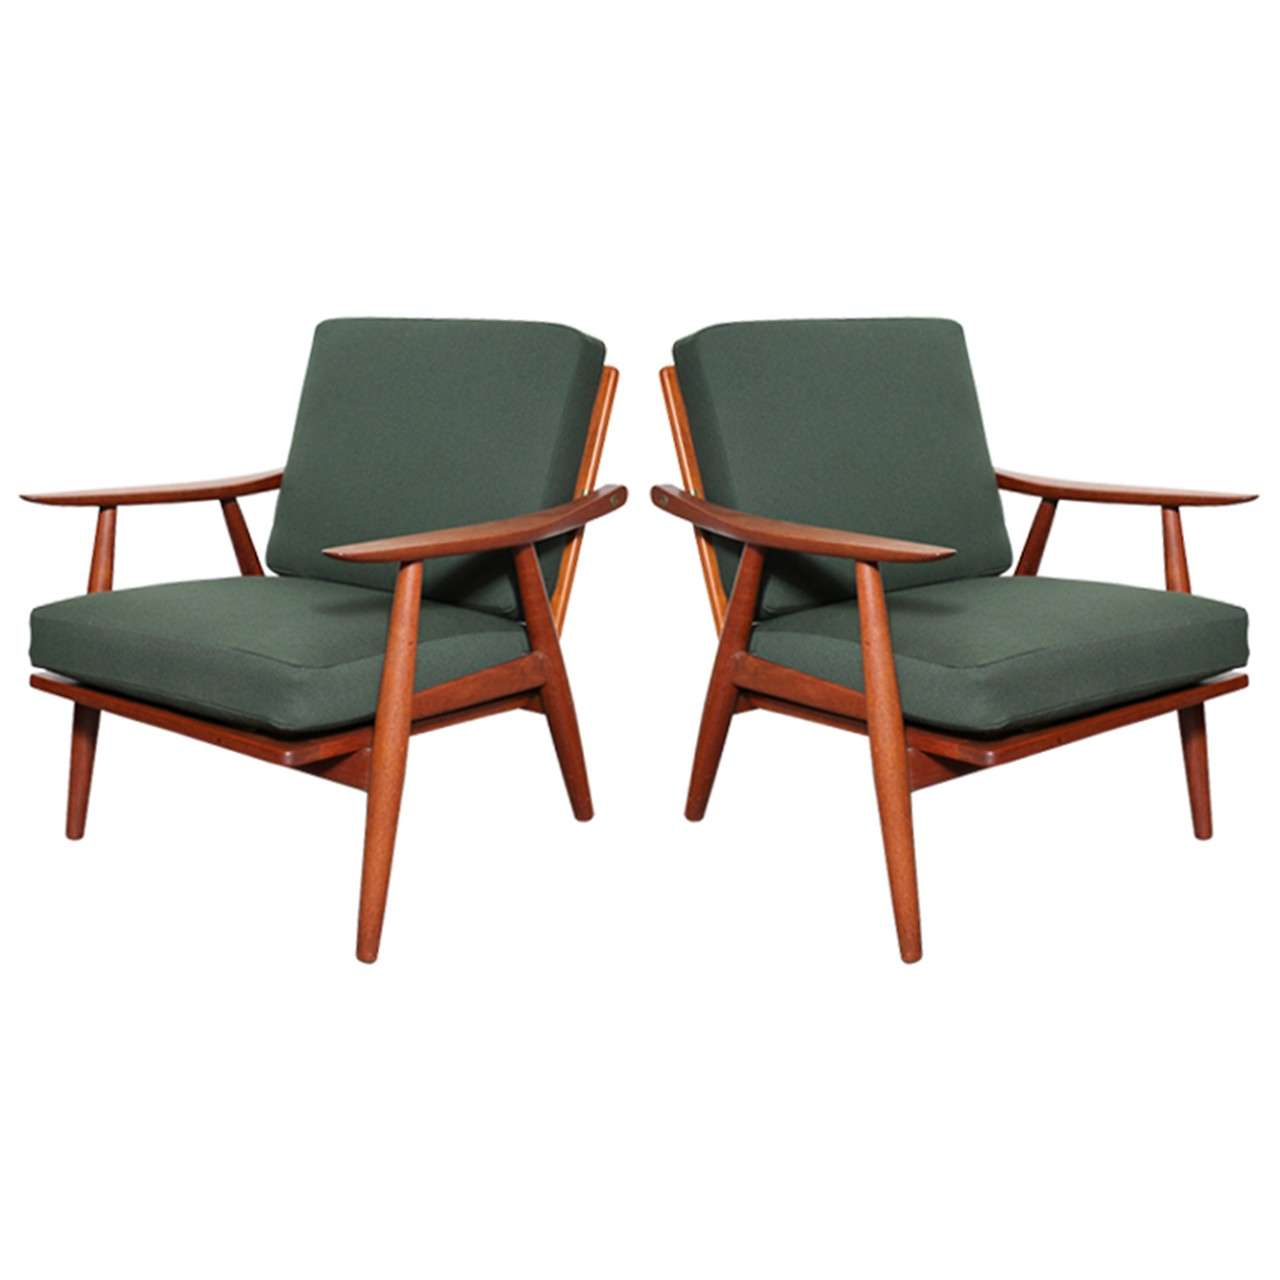 Pair of Teak and Green GE-270 Lounge chairs by Hans J. Wegner